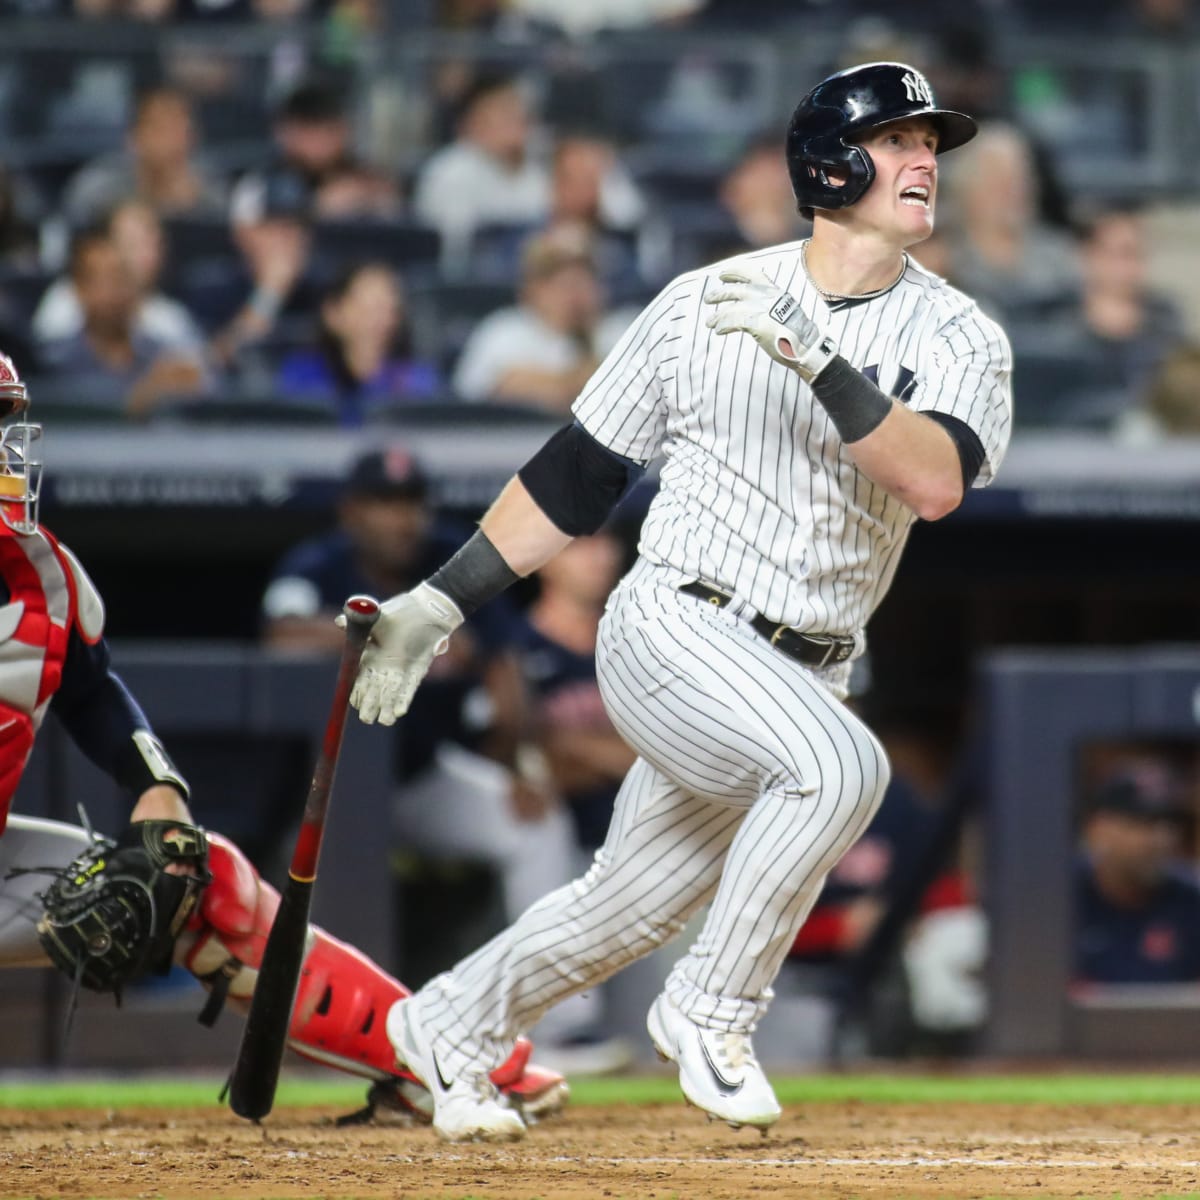 Battling injuries and winning in regular season will be challenge for  Yankees, but don't count them out just yet – New York Daily News